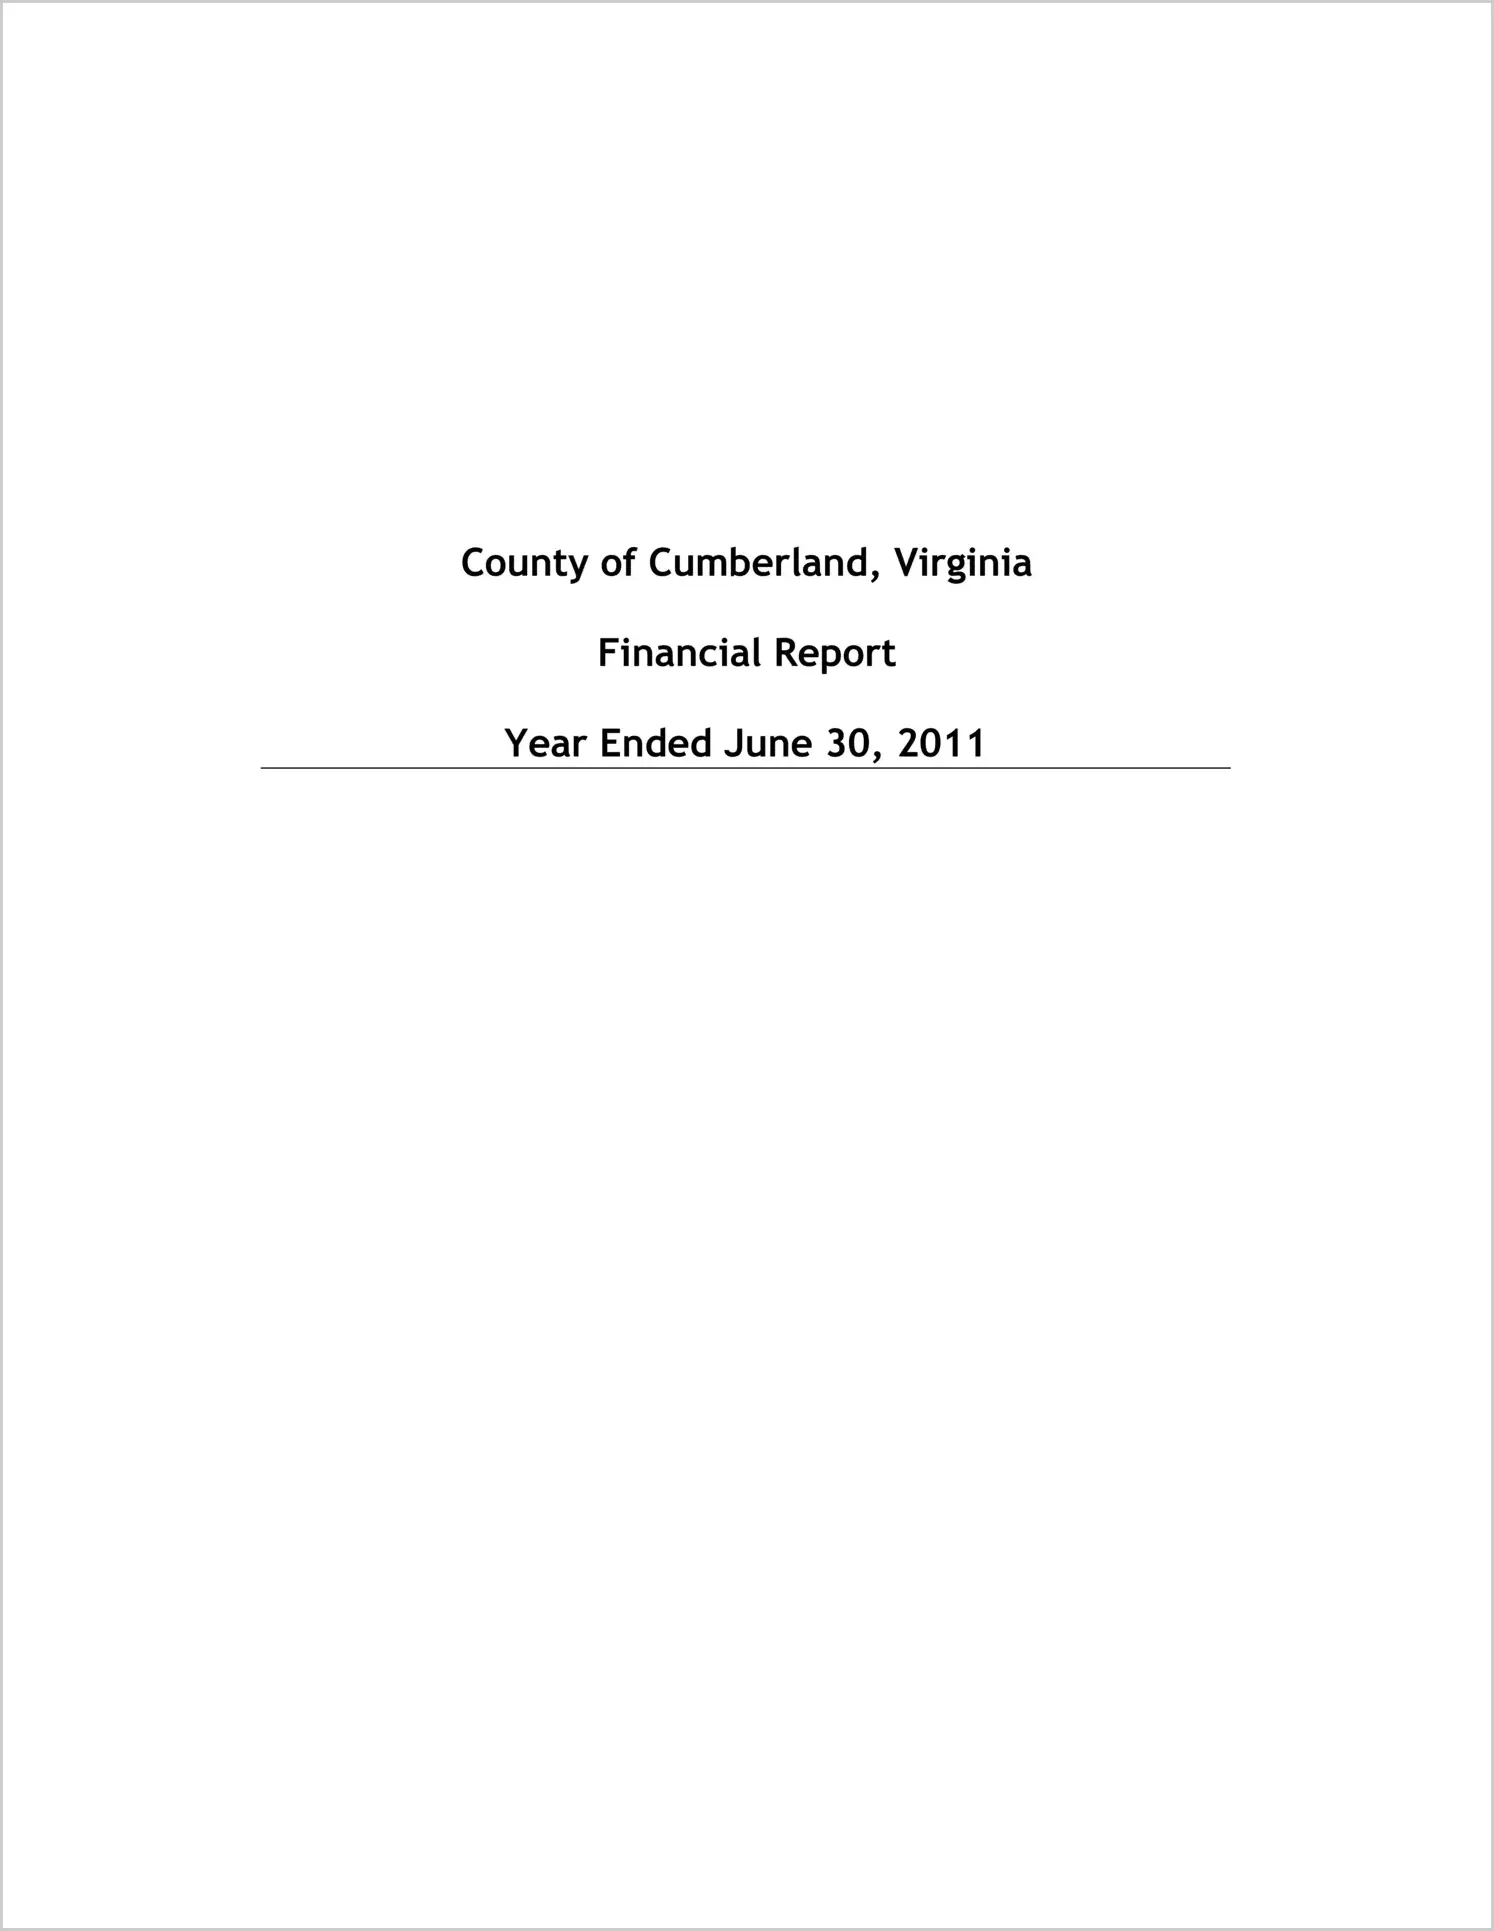 2011 Annual Financial Report for County of Cumberland